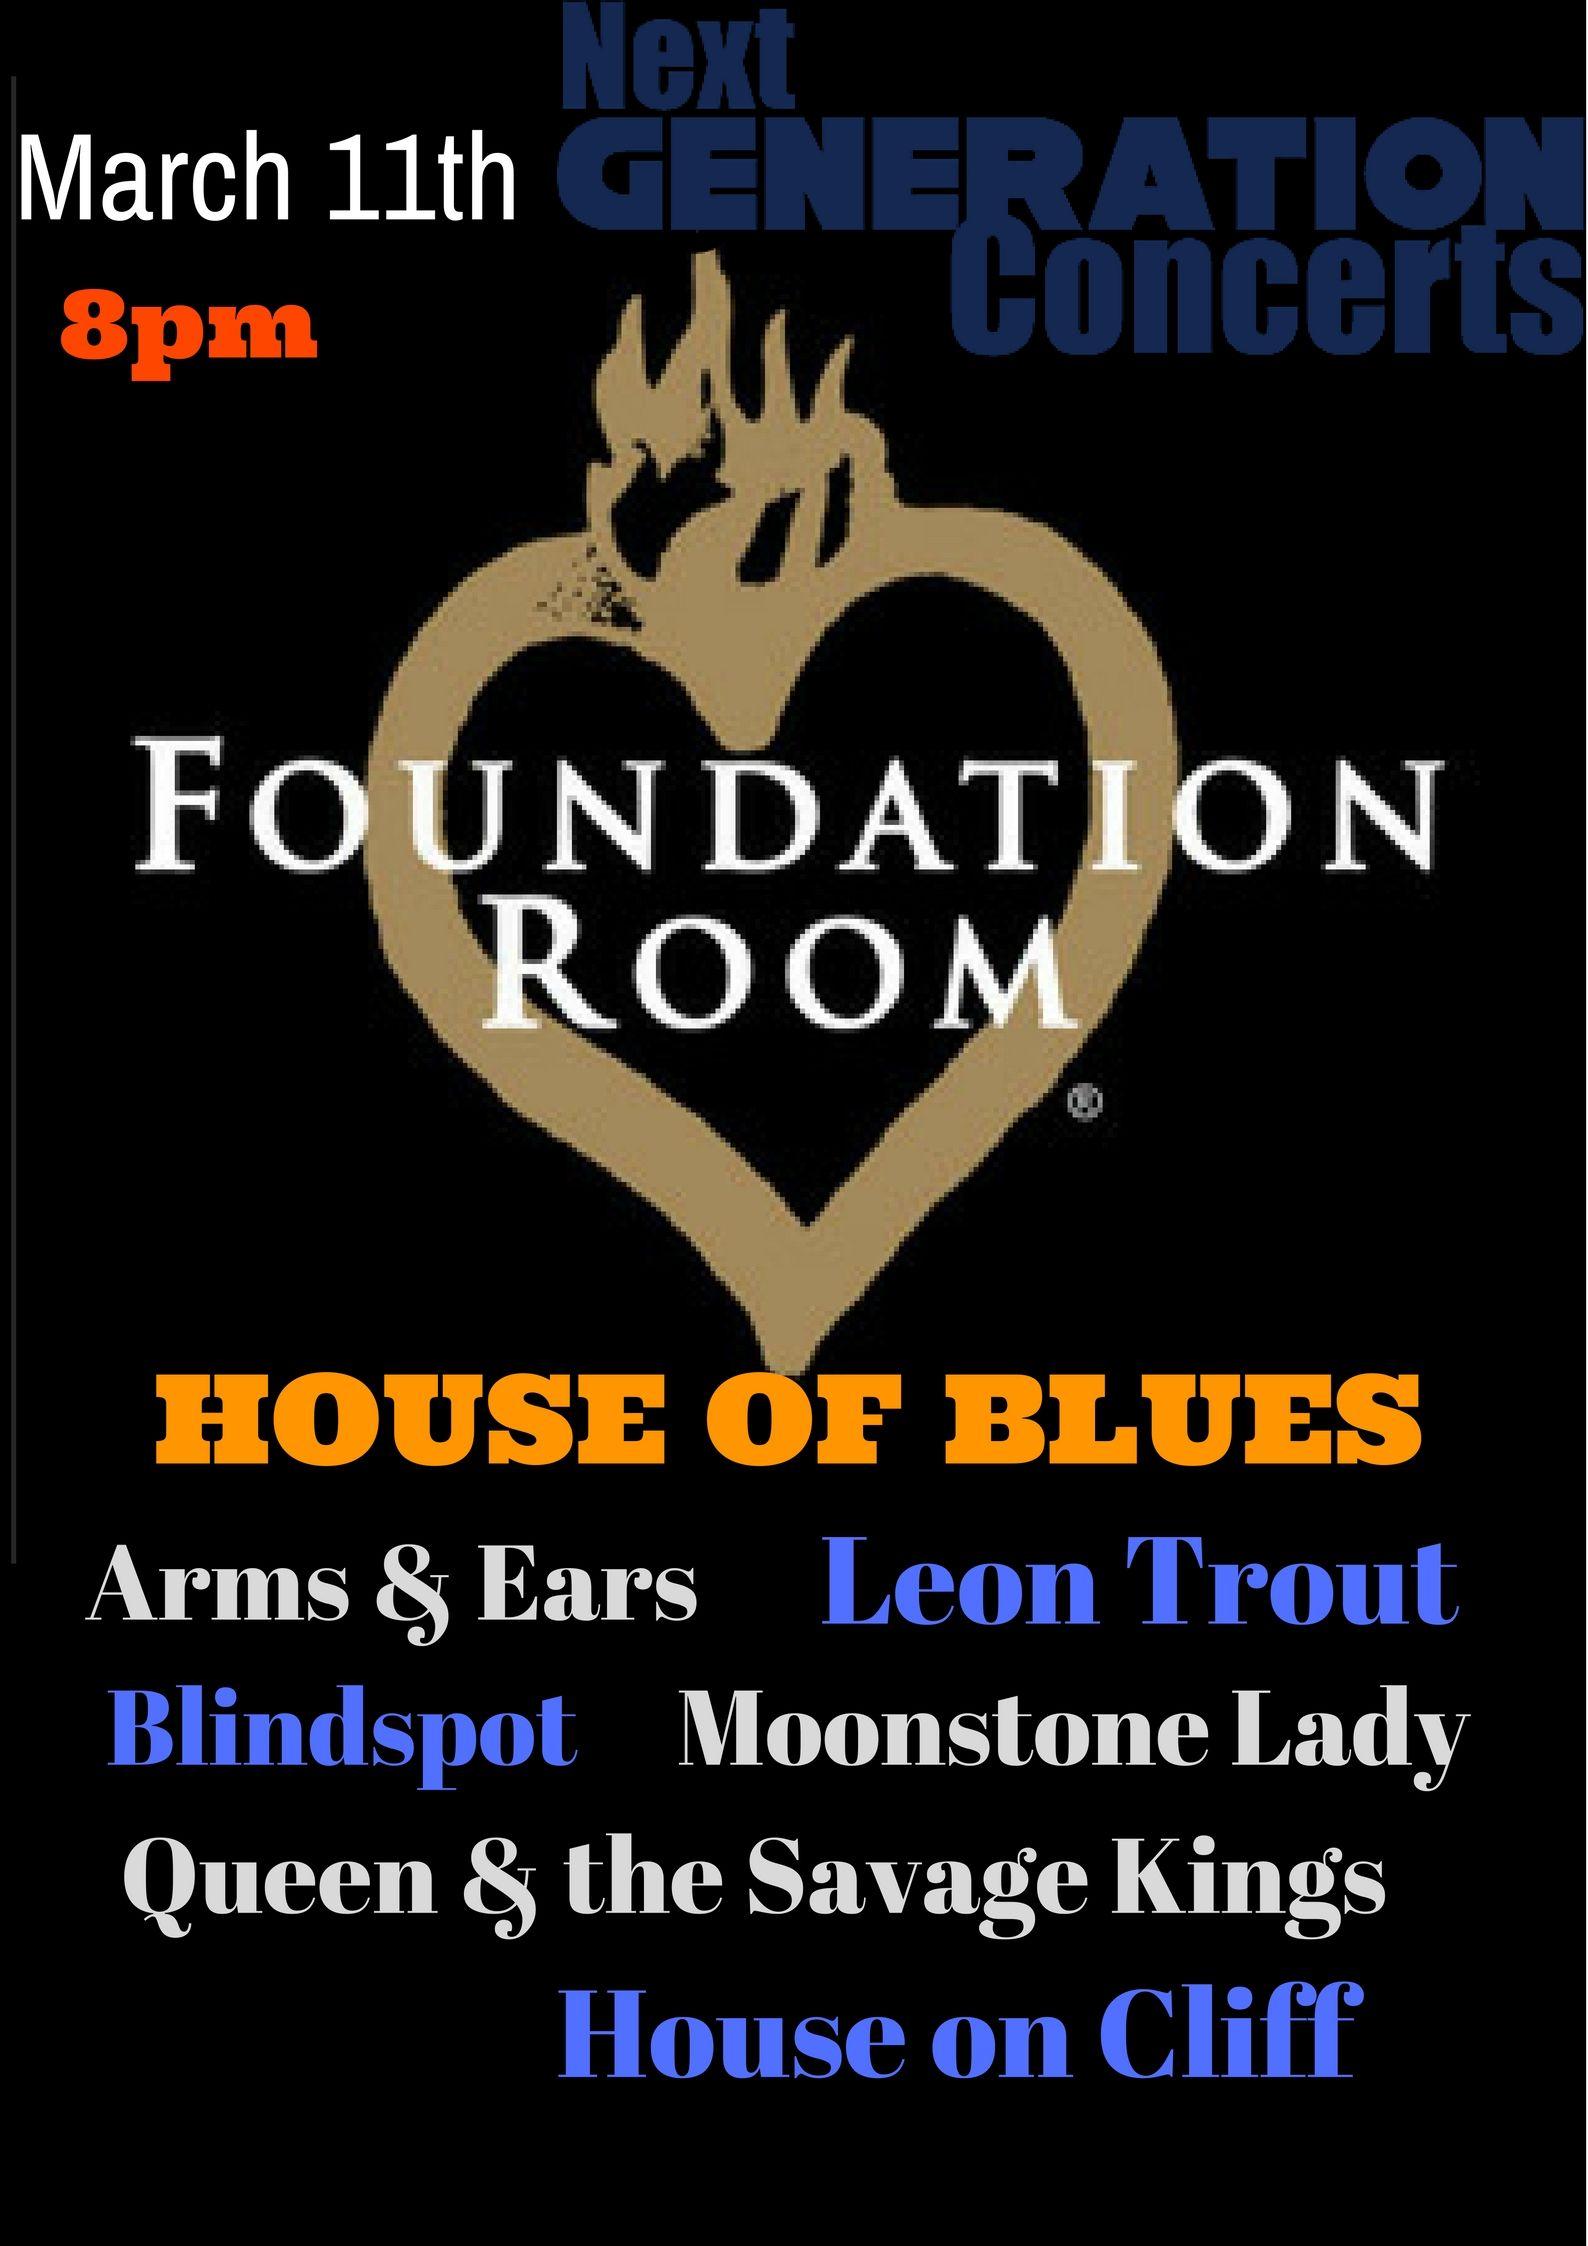 Queen and King Savage Logo - Live in the Foundation Room in The House of Blues. Next Generation